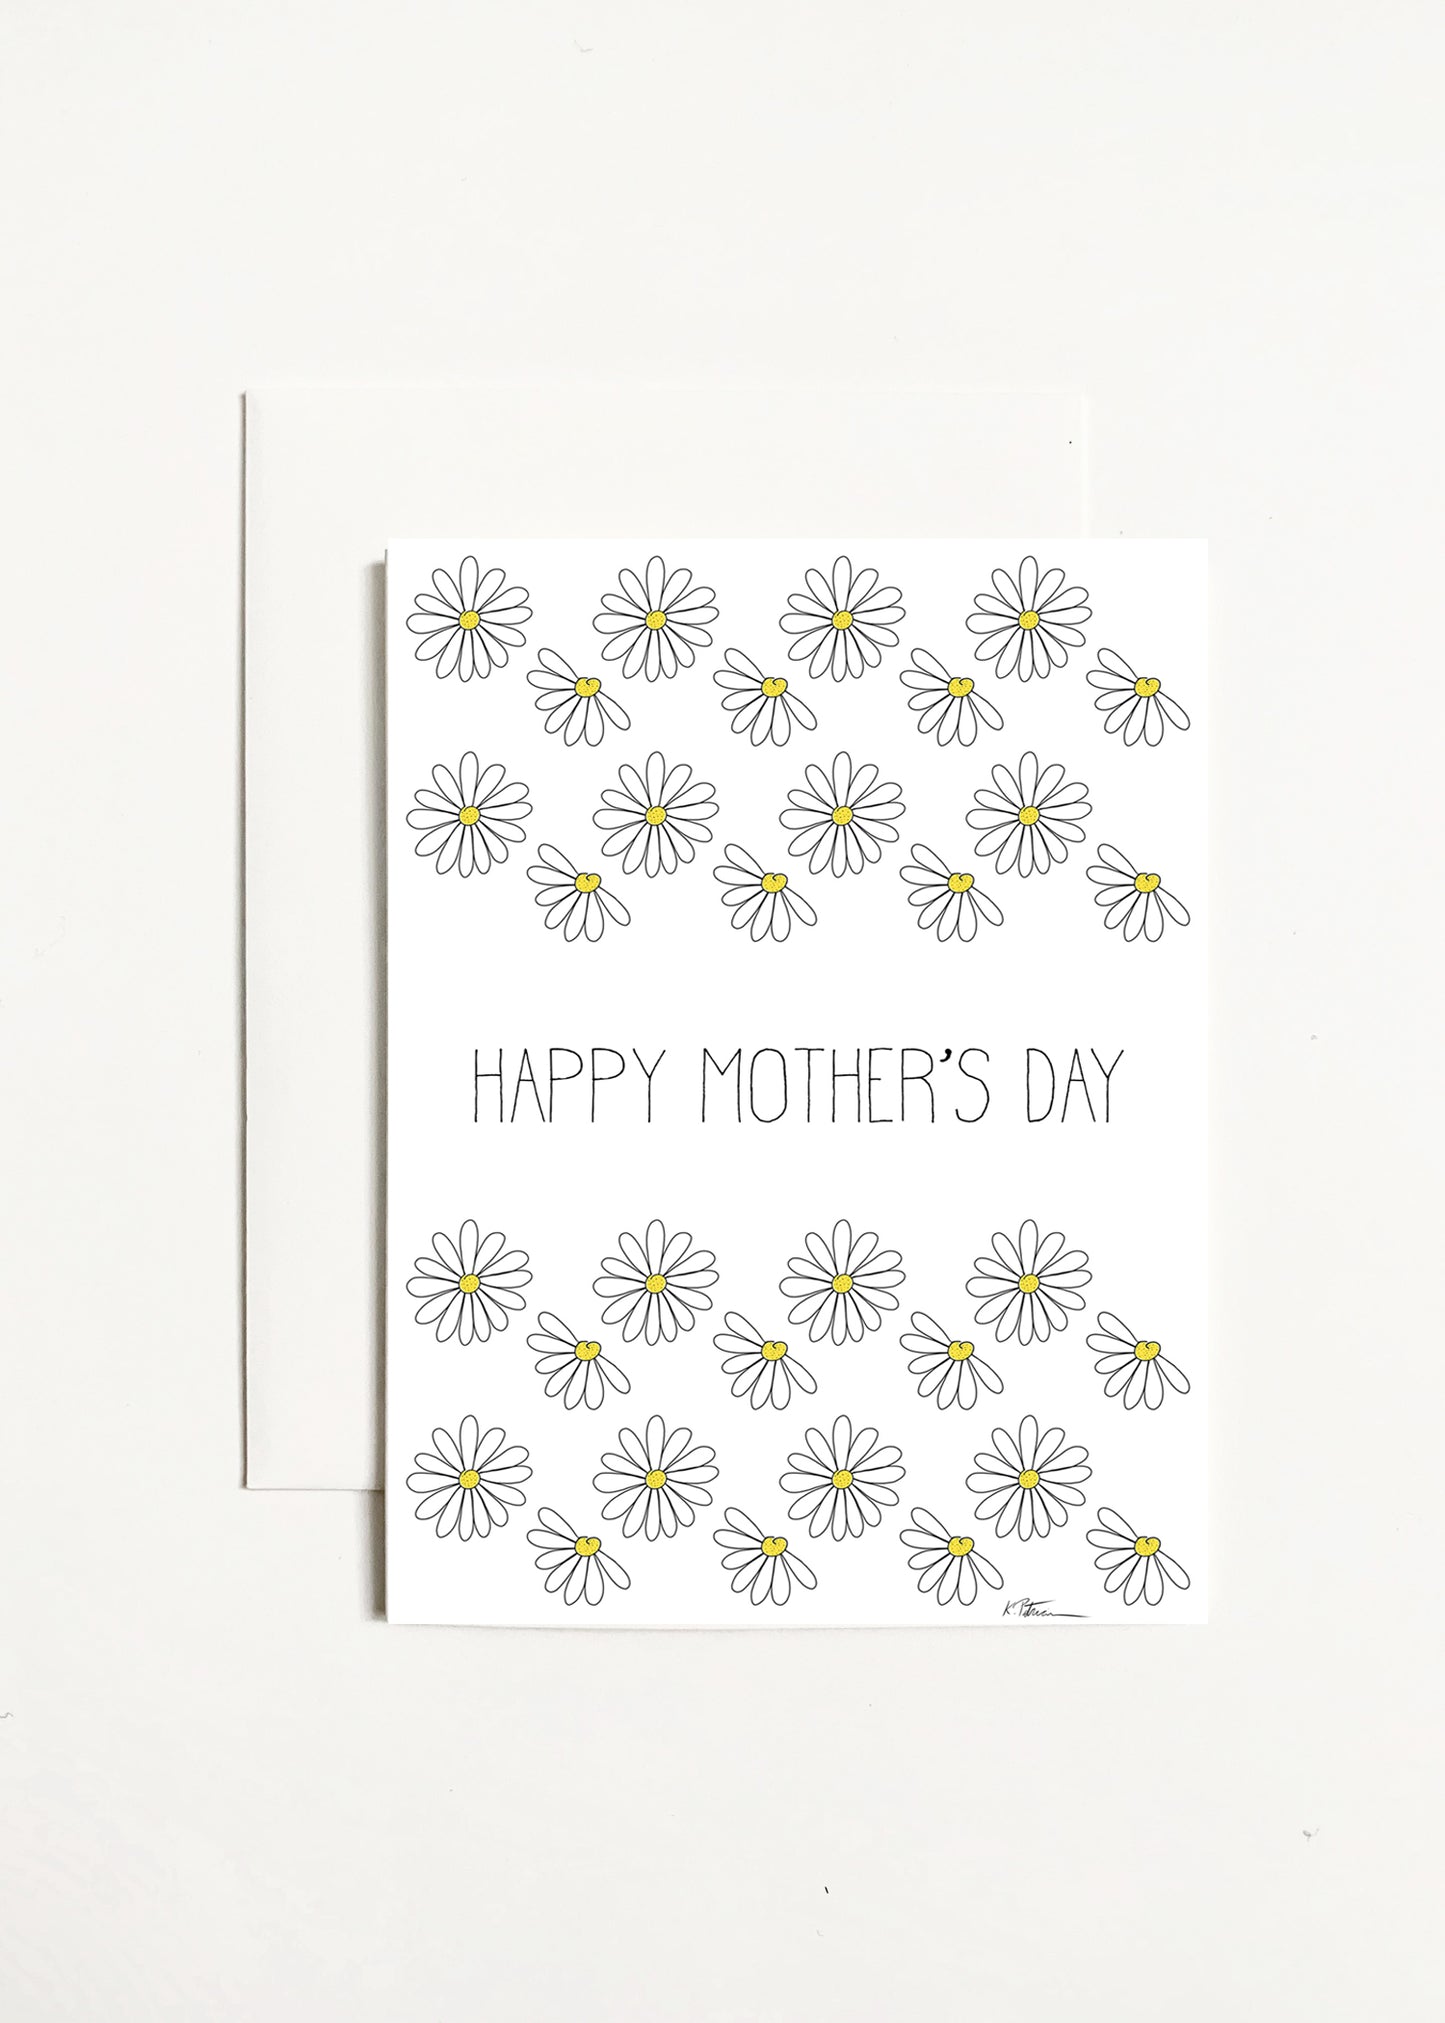 Happy Mother's Day! - Daisies